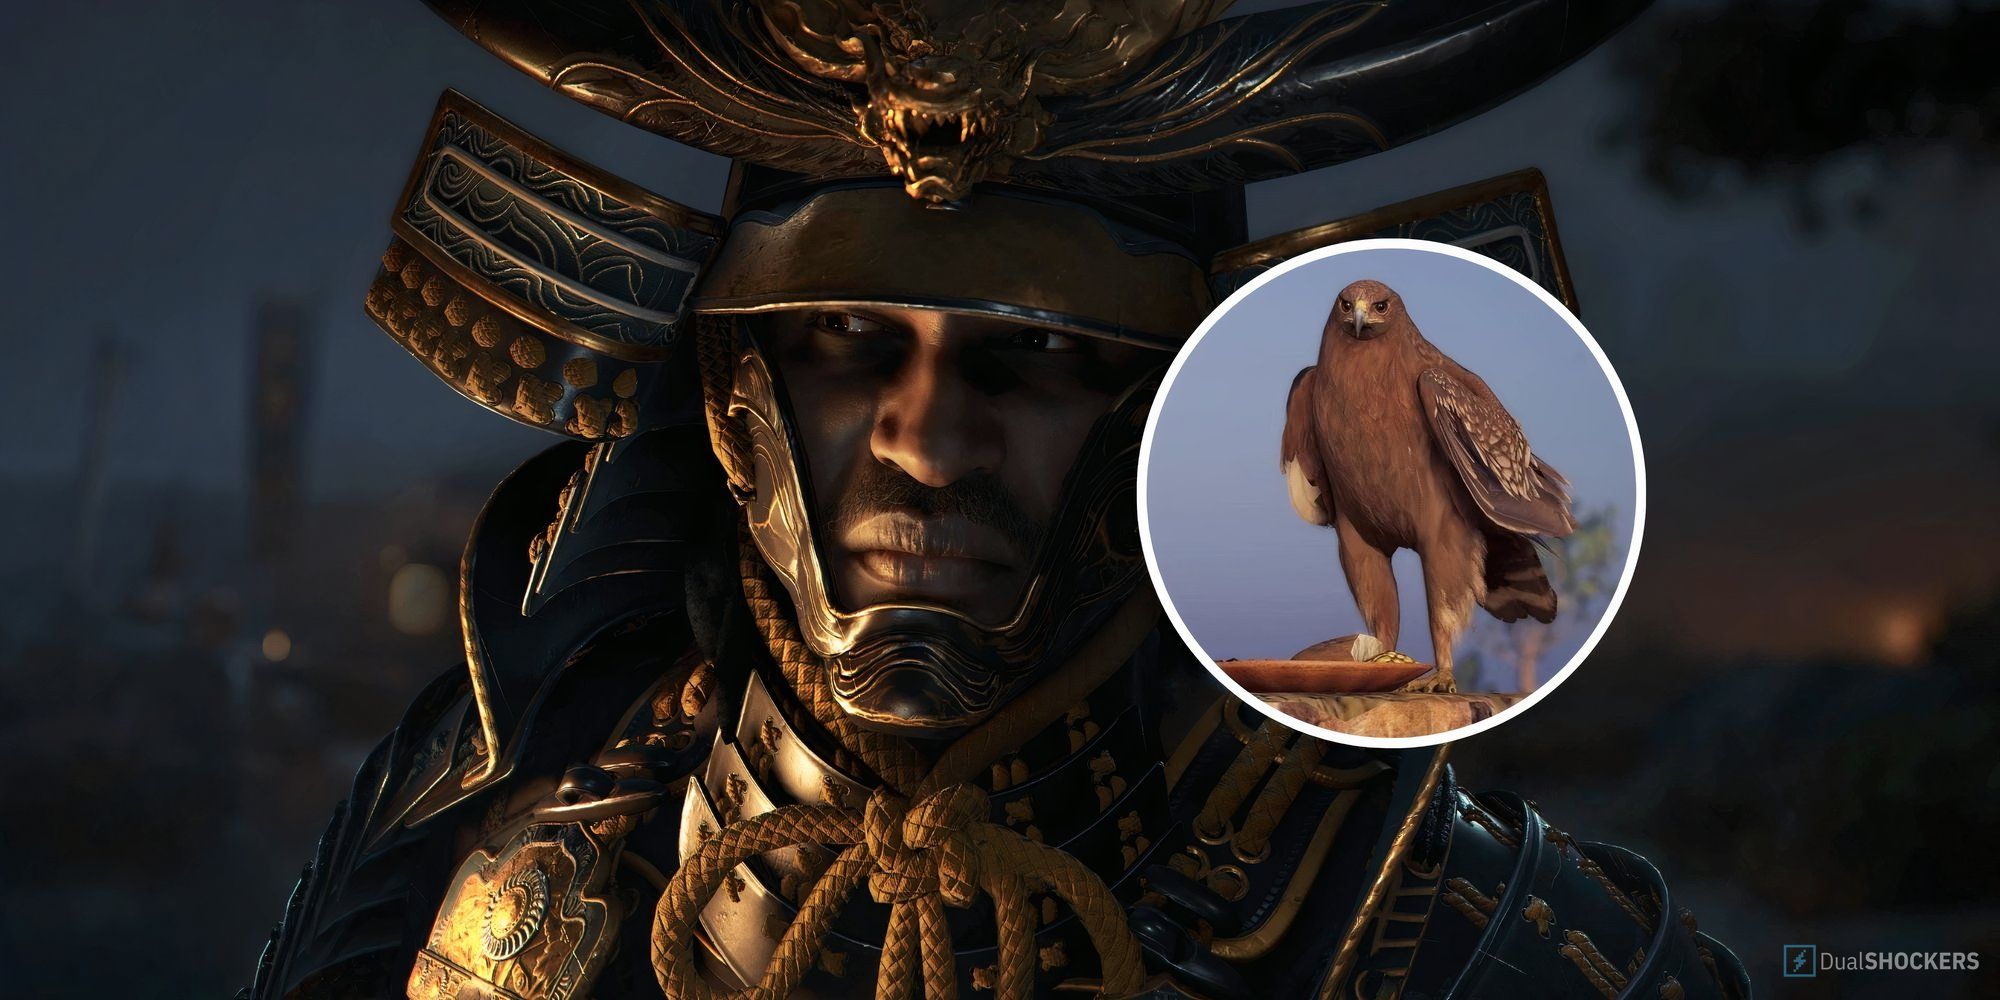 Feature image with Yasuke in his samurai gear and a circle image of a brown eagle from the franchise.